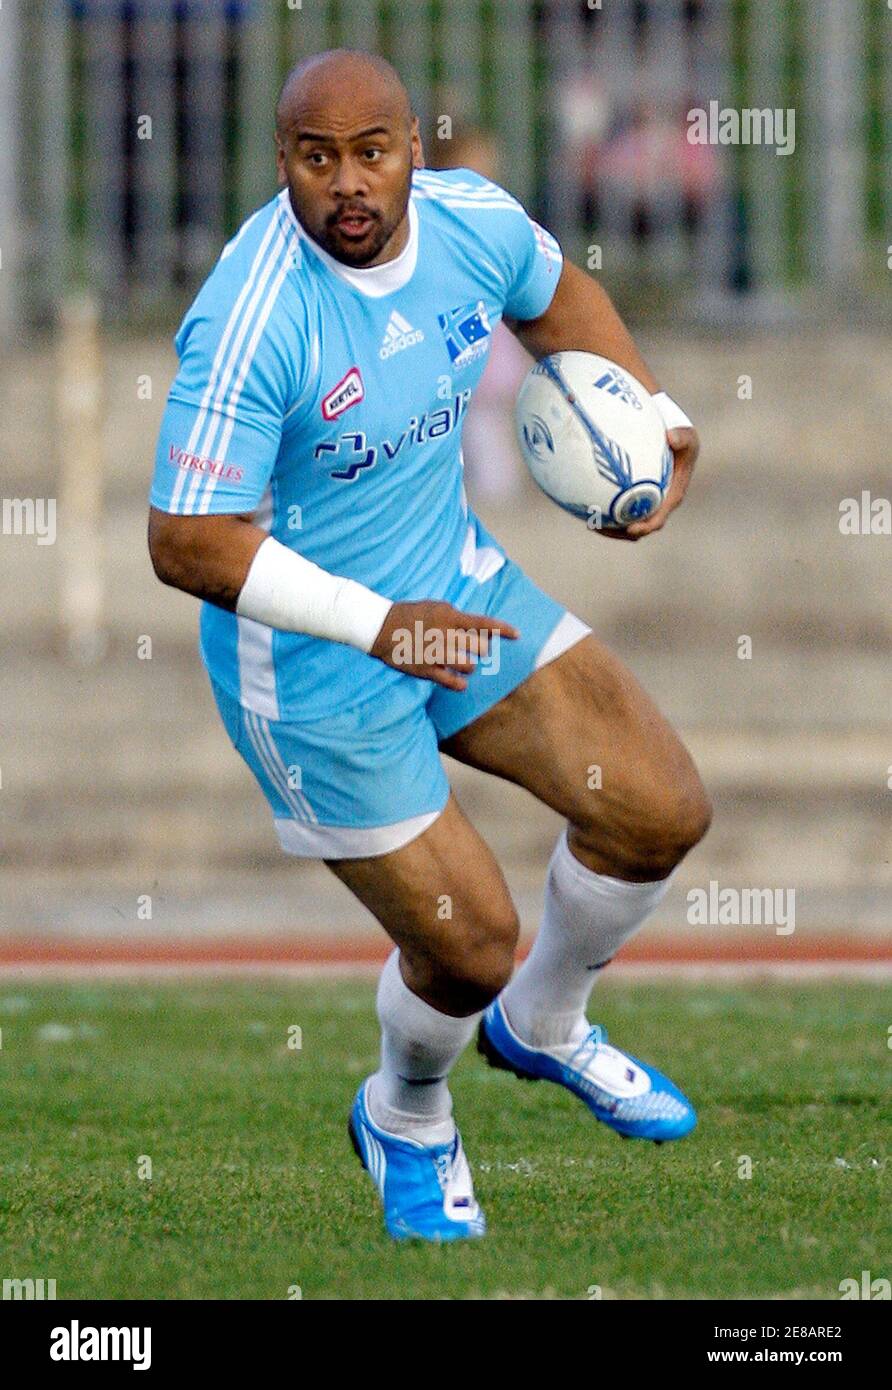 Jonah Lomu of New Zealand, who is now playing for Marseille-Vitrolles, runs  with the ball during a rugby match against Montmelian in Vitrolles, near  Marseille, southeastern France, November 22, 2009. The 34-year-old,